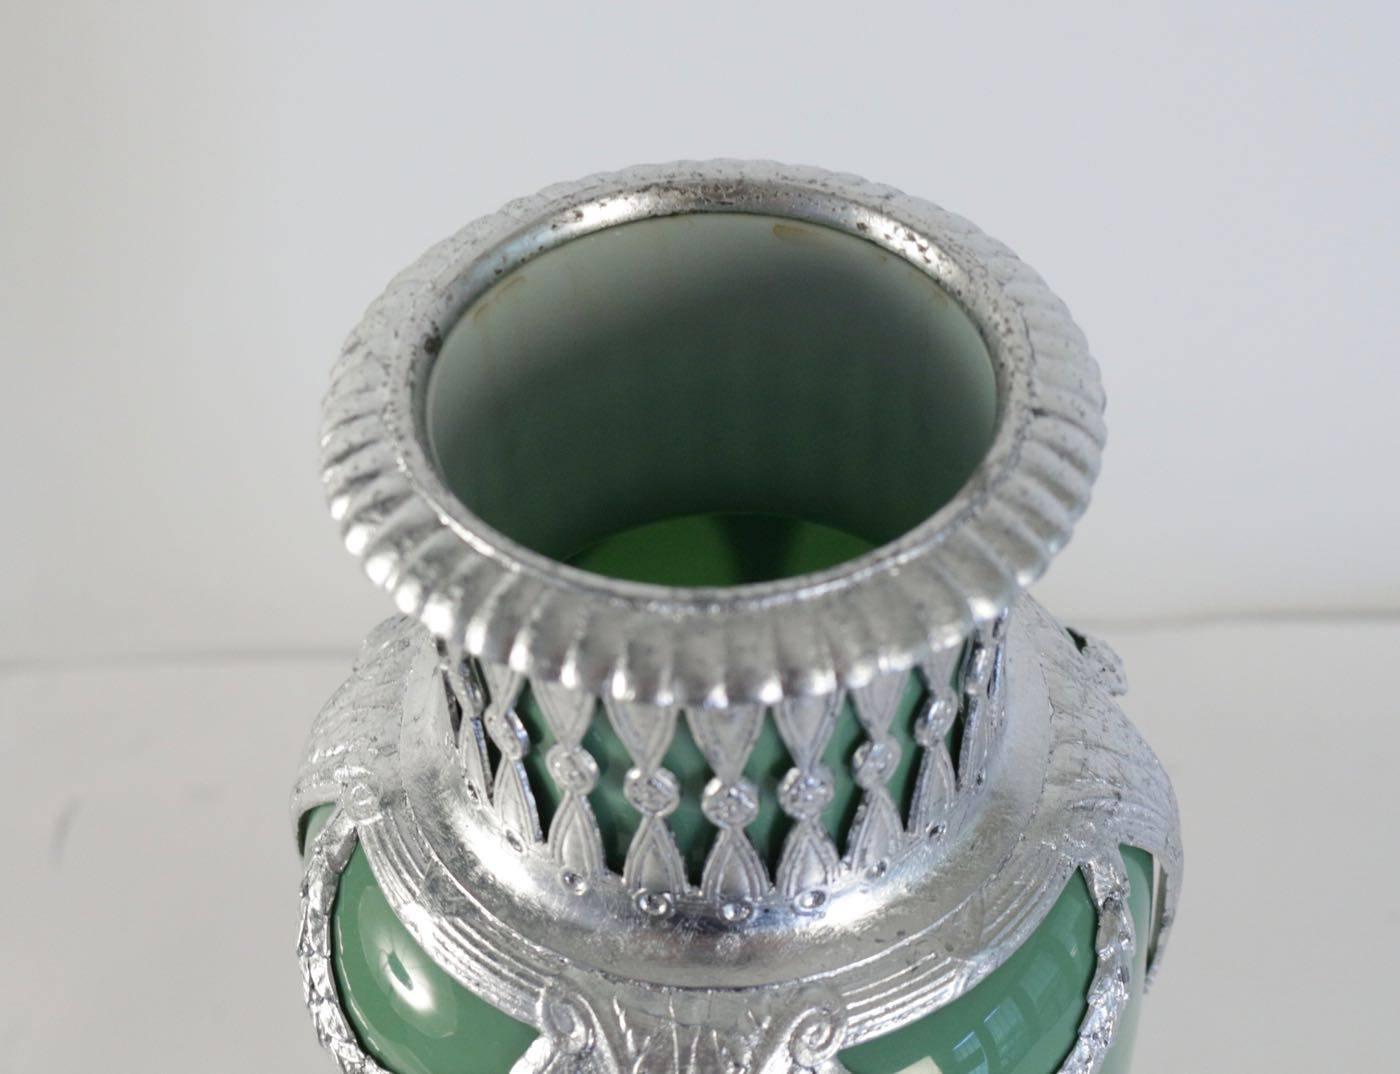 Napoleon III Celadon Vase in Faience, Silver Plate and Silver Leaf, 19th Century Period For Sale